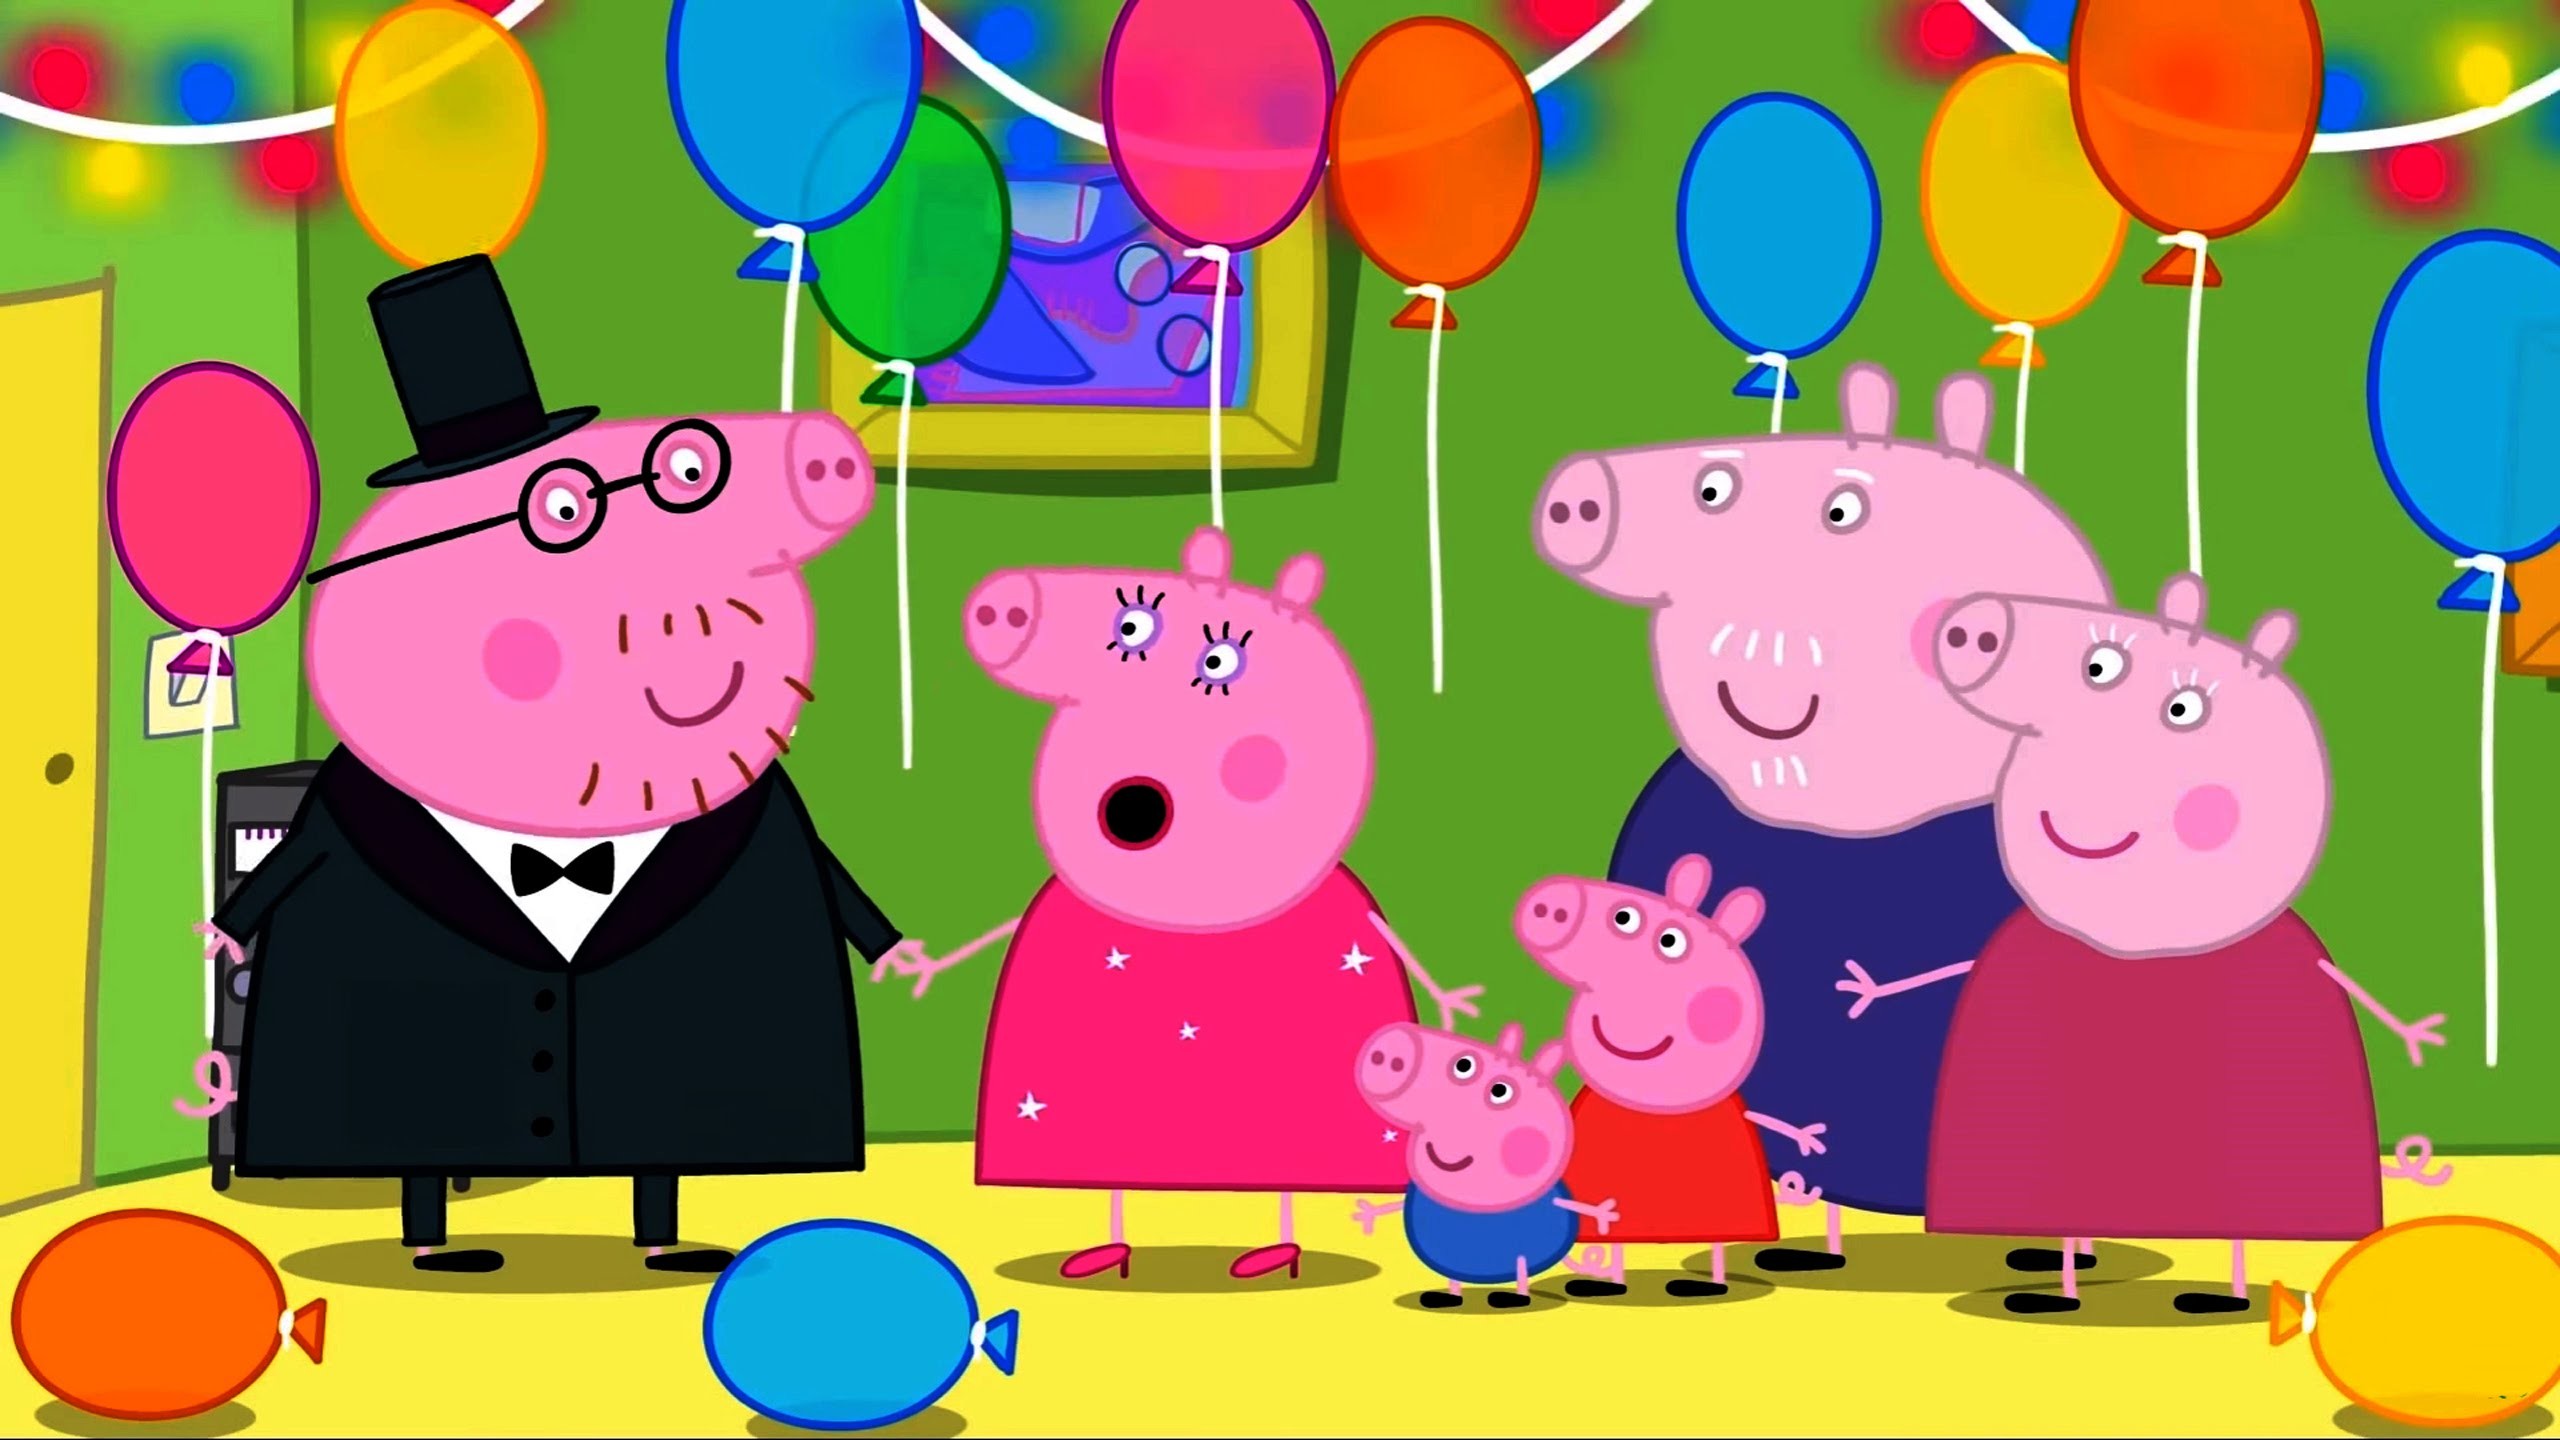 2560x1440 Peppa Pig Coloring Pages for Kids Peppa Pig Coloring Games Peppa Pig daddy  pig mummy Birthday day - YouTube